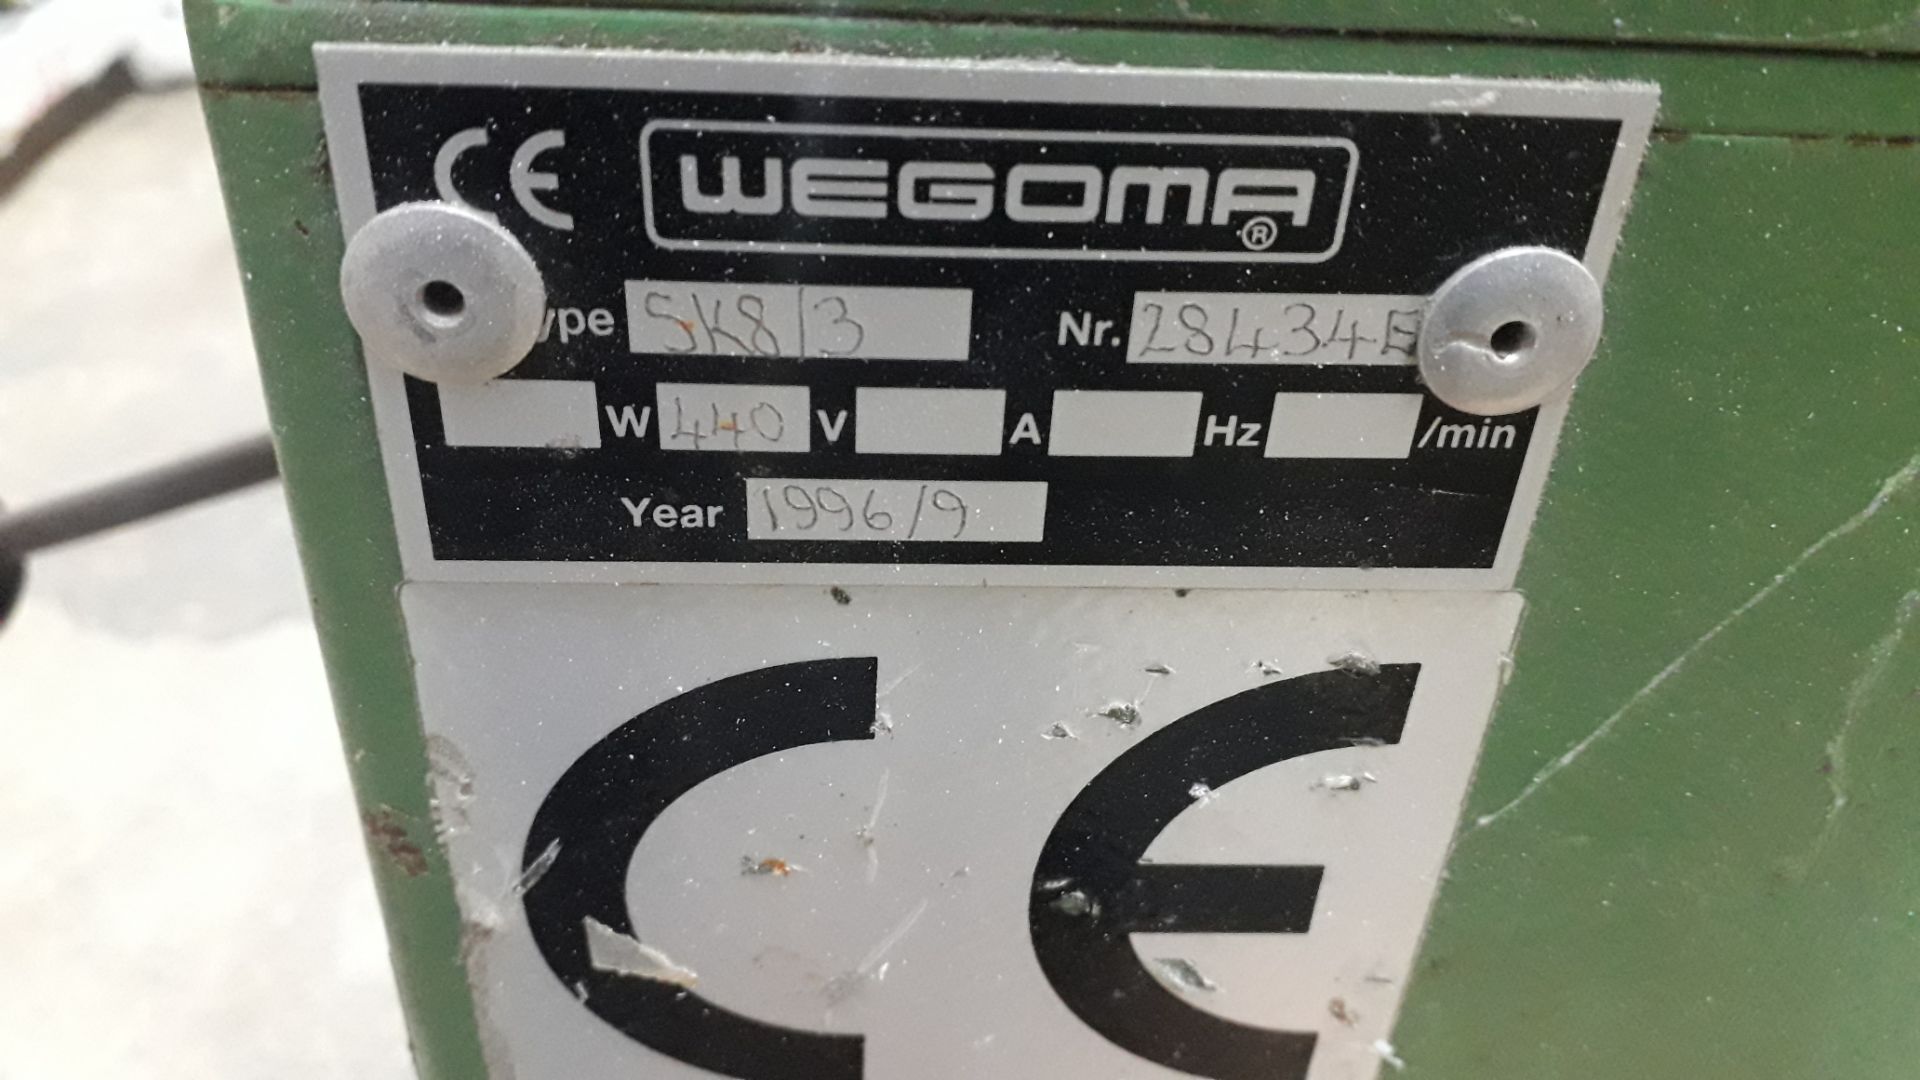 Wegoma SK8/3 Copy Router Serial Number 284S4E (1996) (Hard Wired – Disconnection required by a - Image 6 of 6